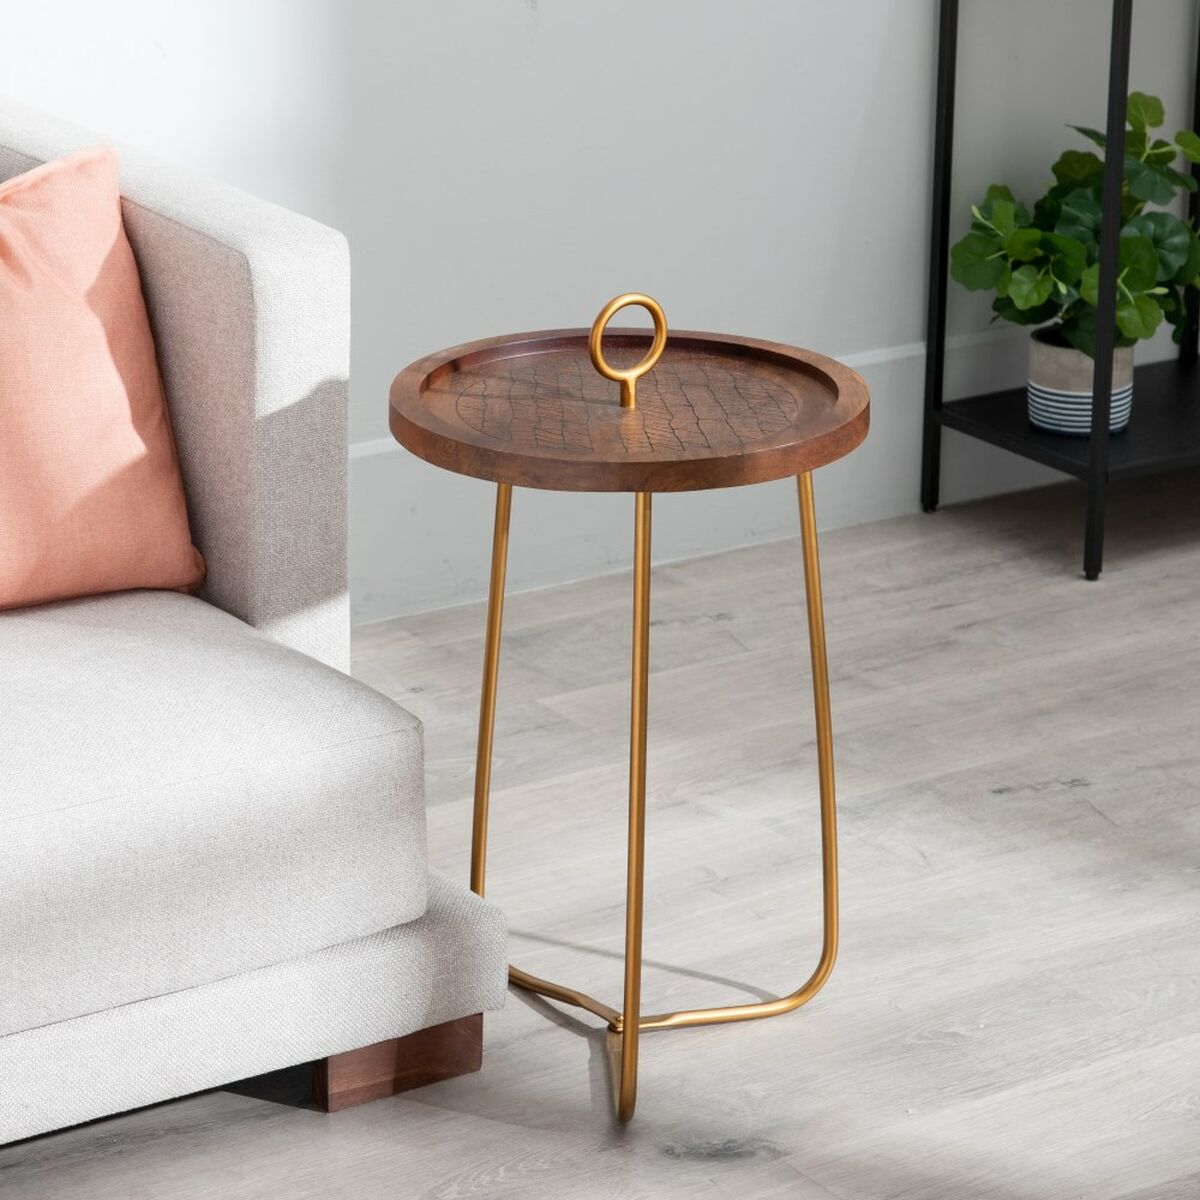 Side table in Wood and Golden Metal (38 x 38 x 66 cm)